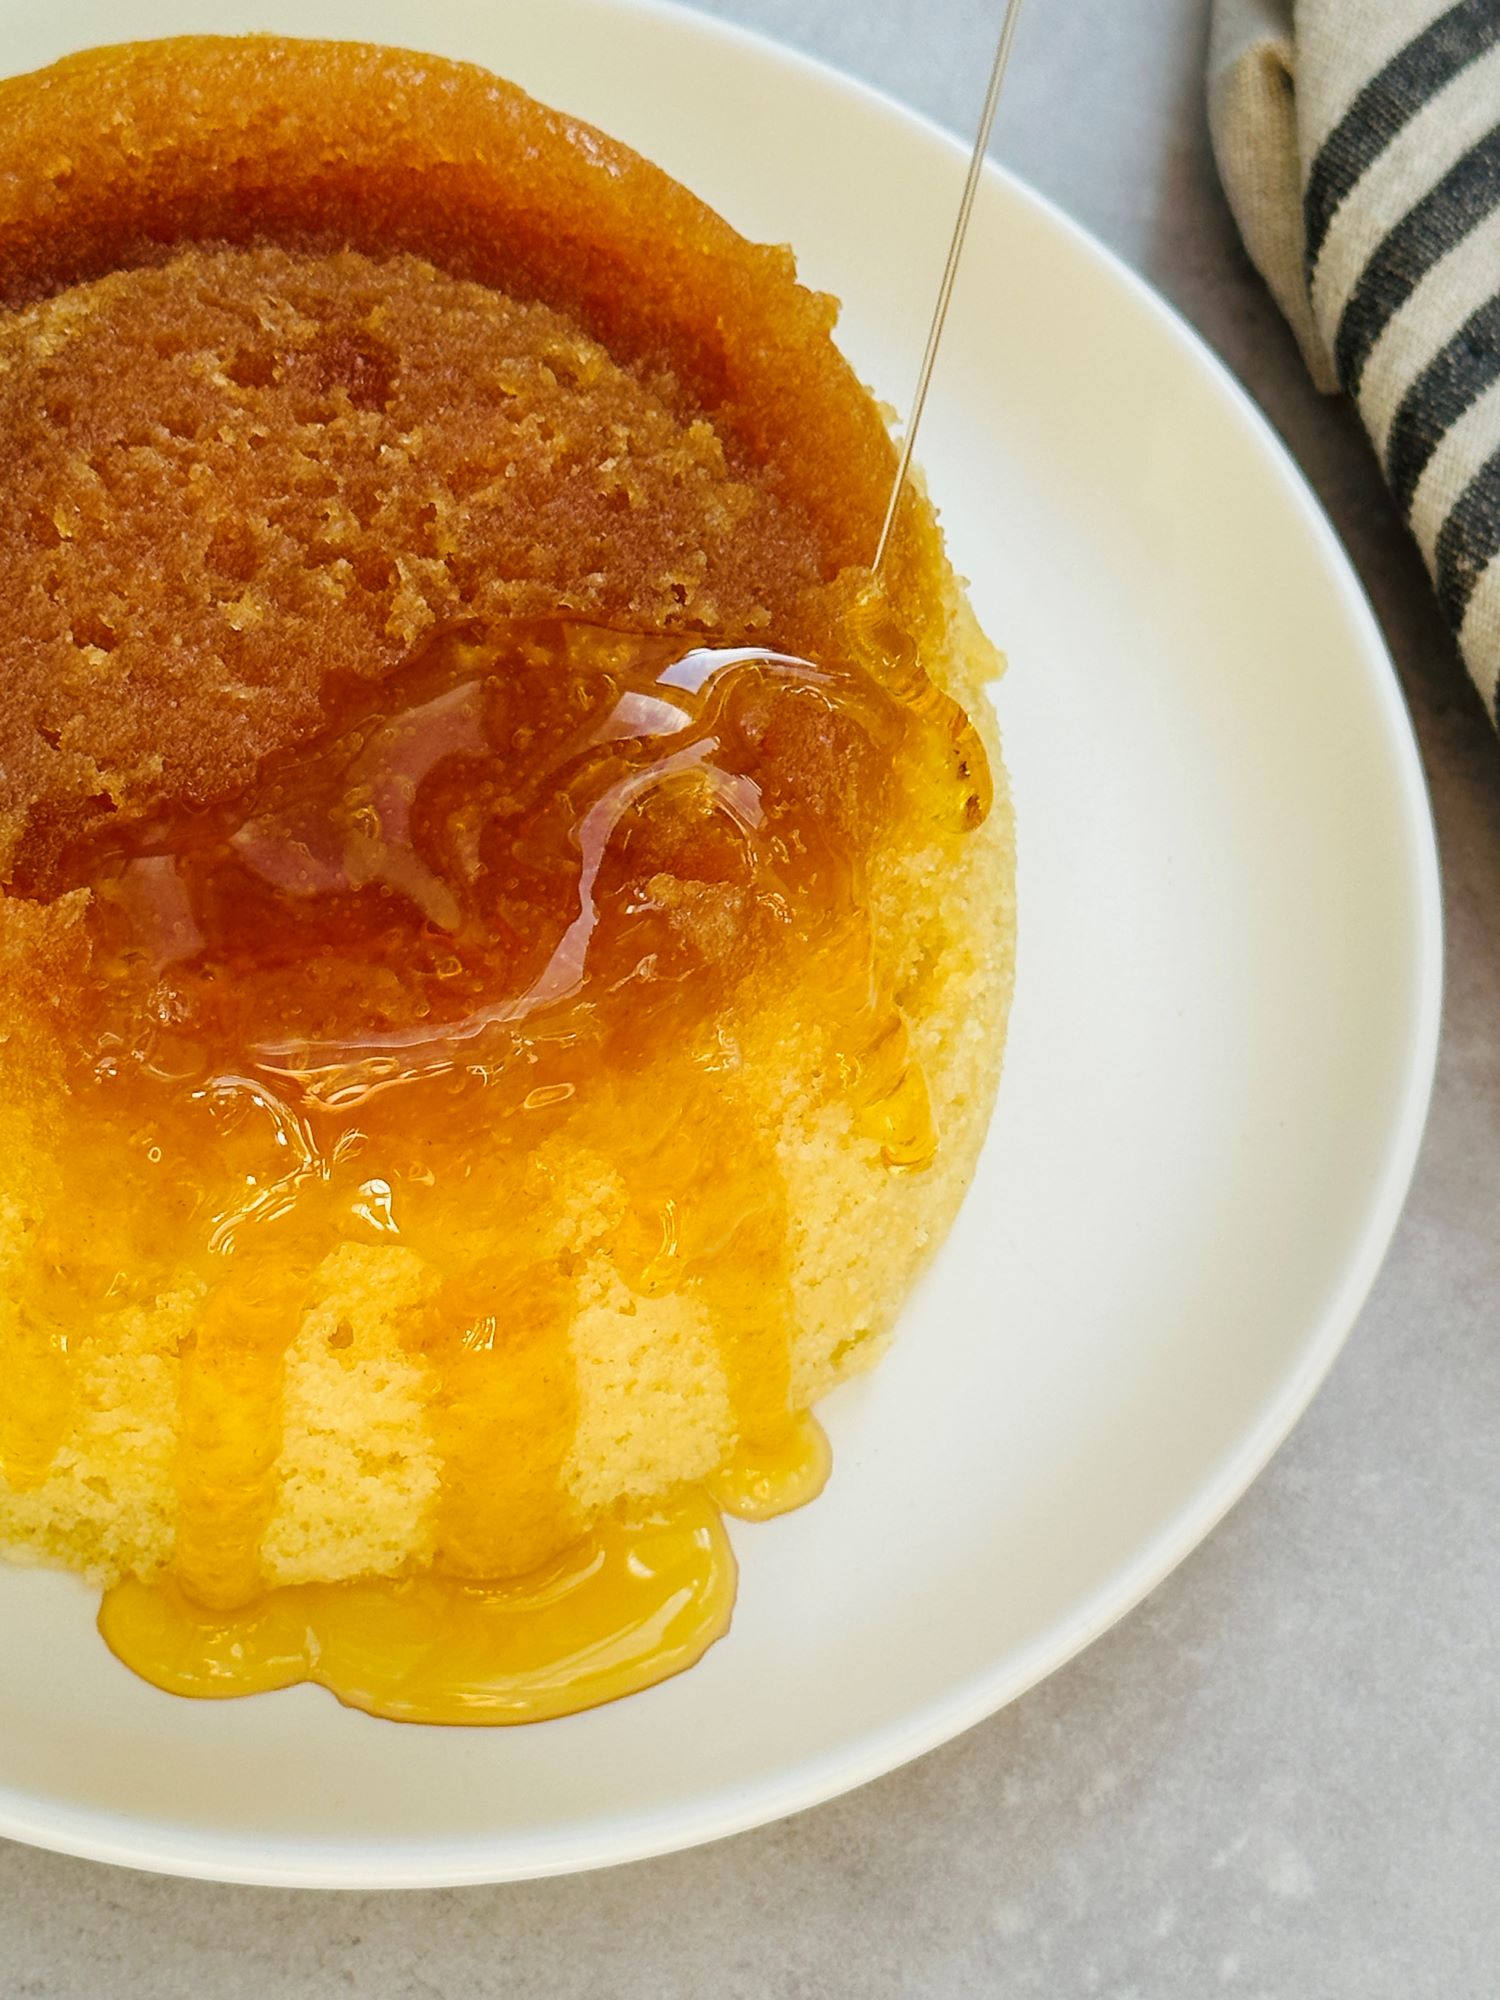 drizzling golden syrup on sponge cake